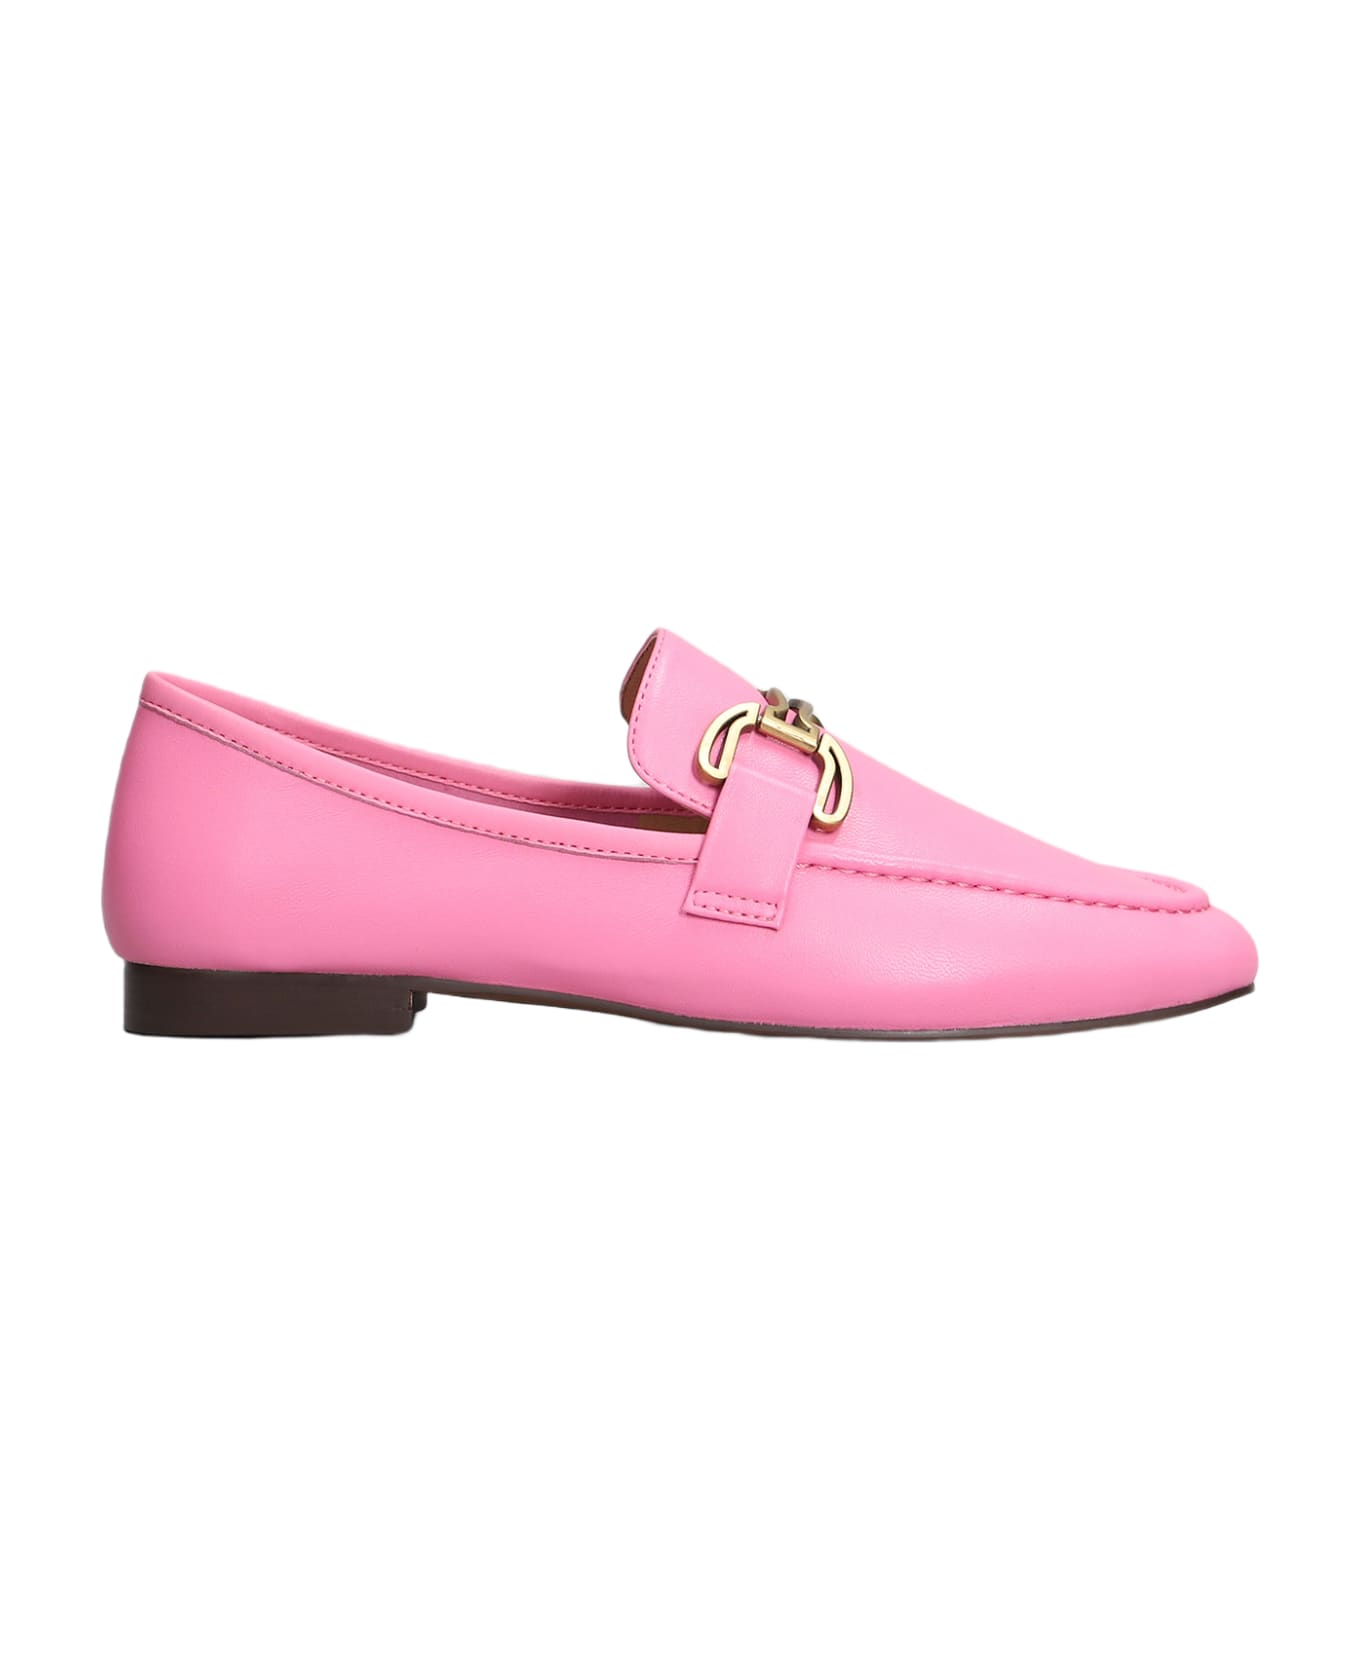 Bibi Lou Zagreb Ii Loafers In Rose-pink Leather - rose-pink フラットシューズ